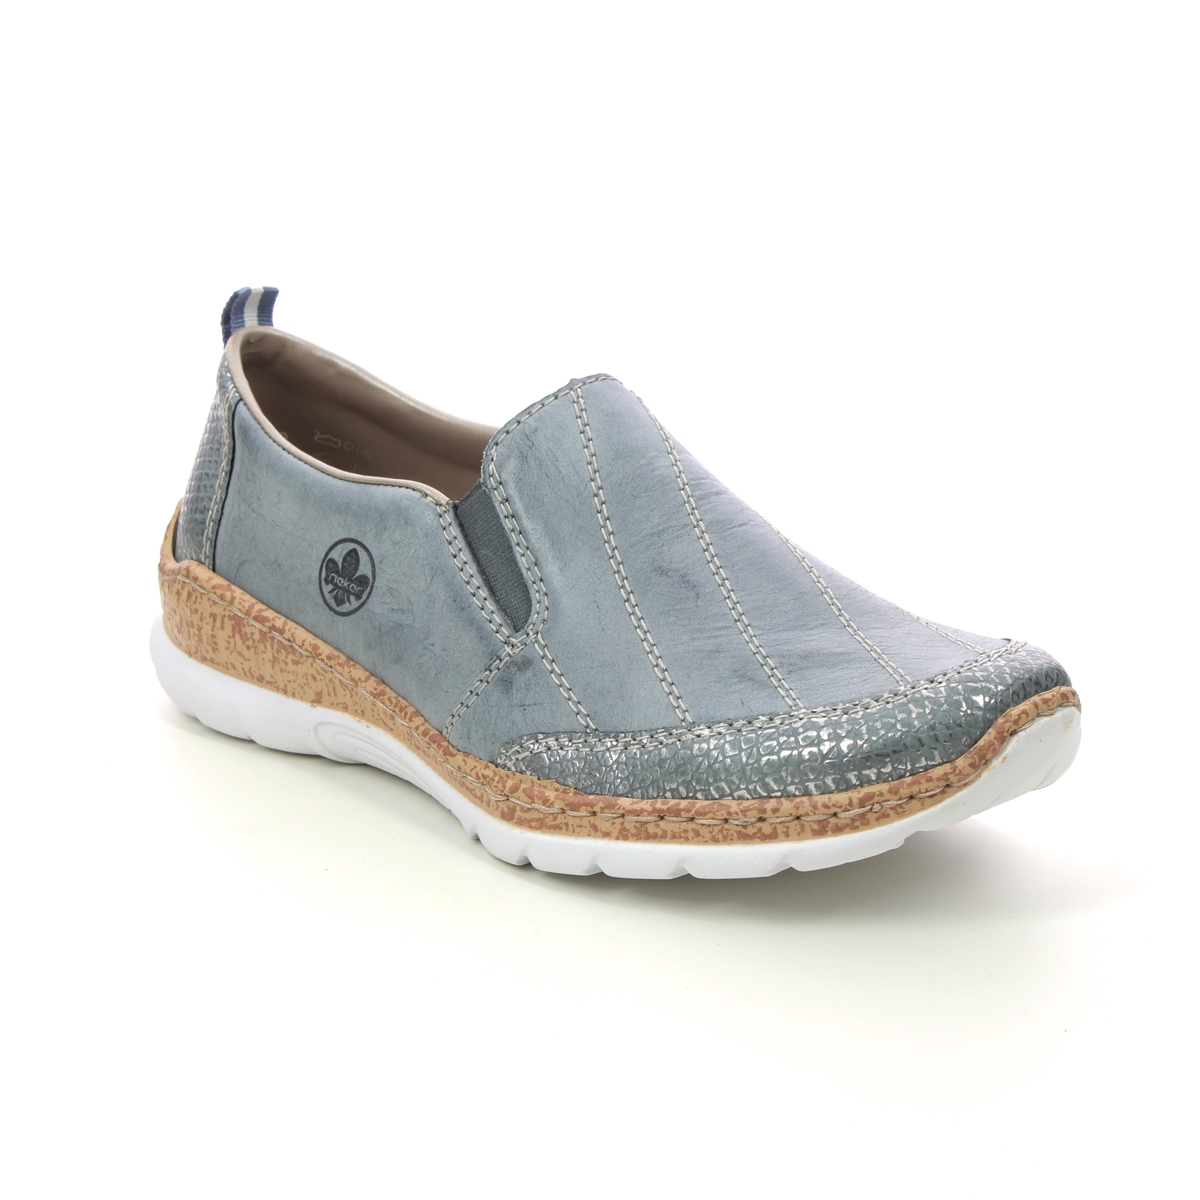 Rieker Empilucas Denim Leather Womens Comfort Slip On Shoes N4274-12 In Size 40 In Plain Denim Leather